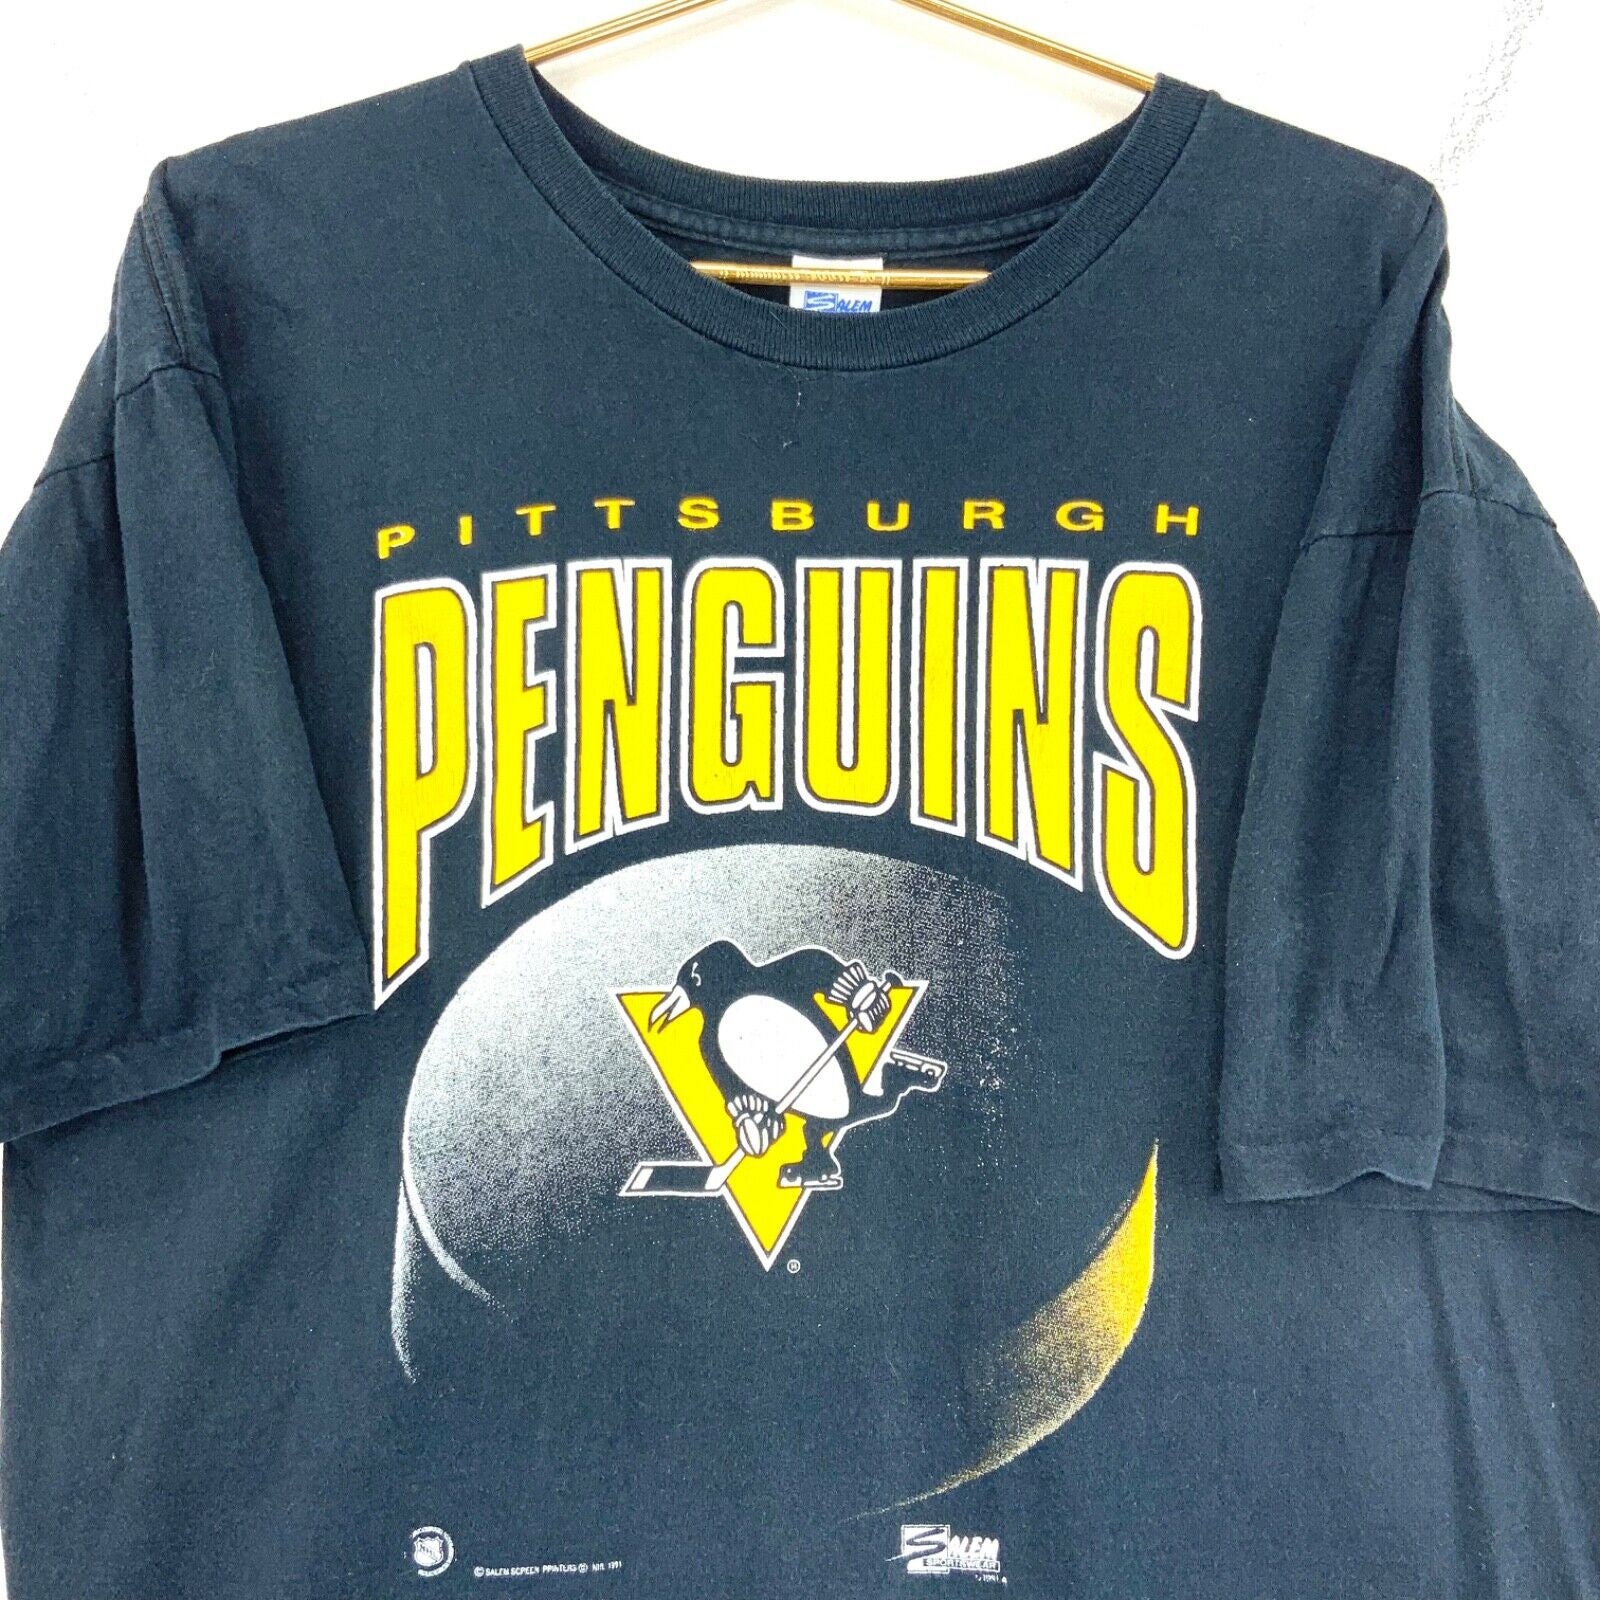 Vintage 90s PITTSBURGH PENGUINS NHL Fruit Of The Loom T-Shirt XL